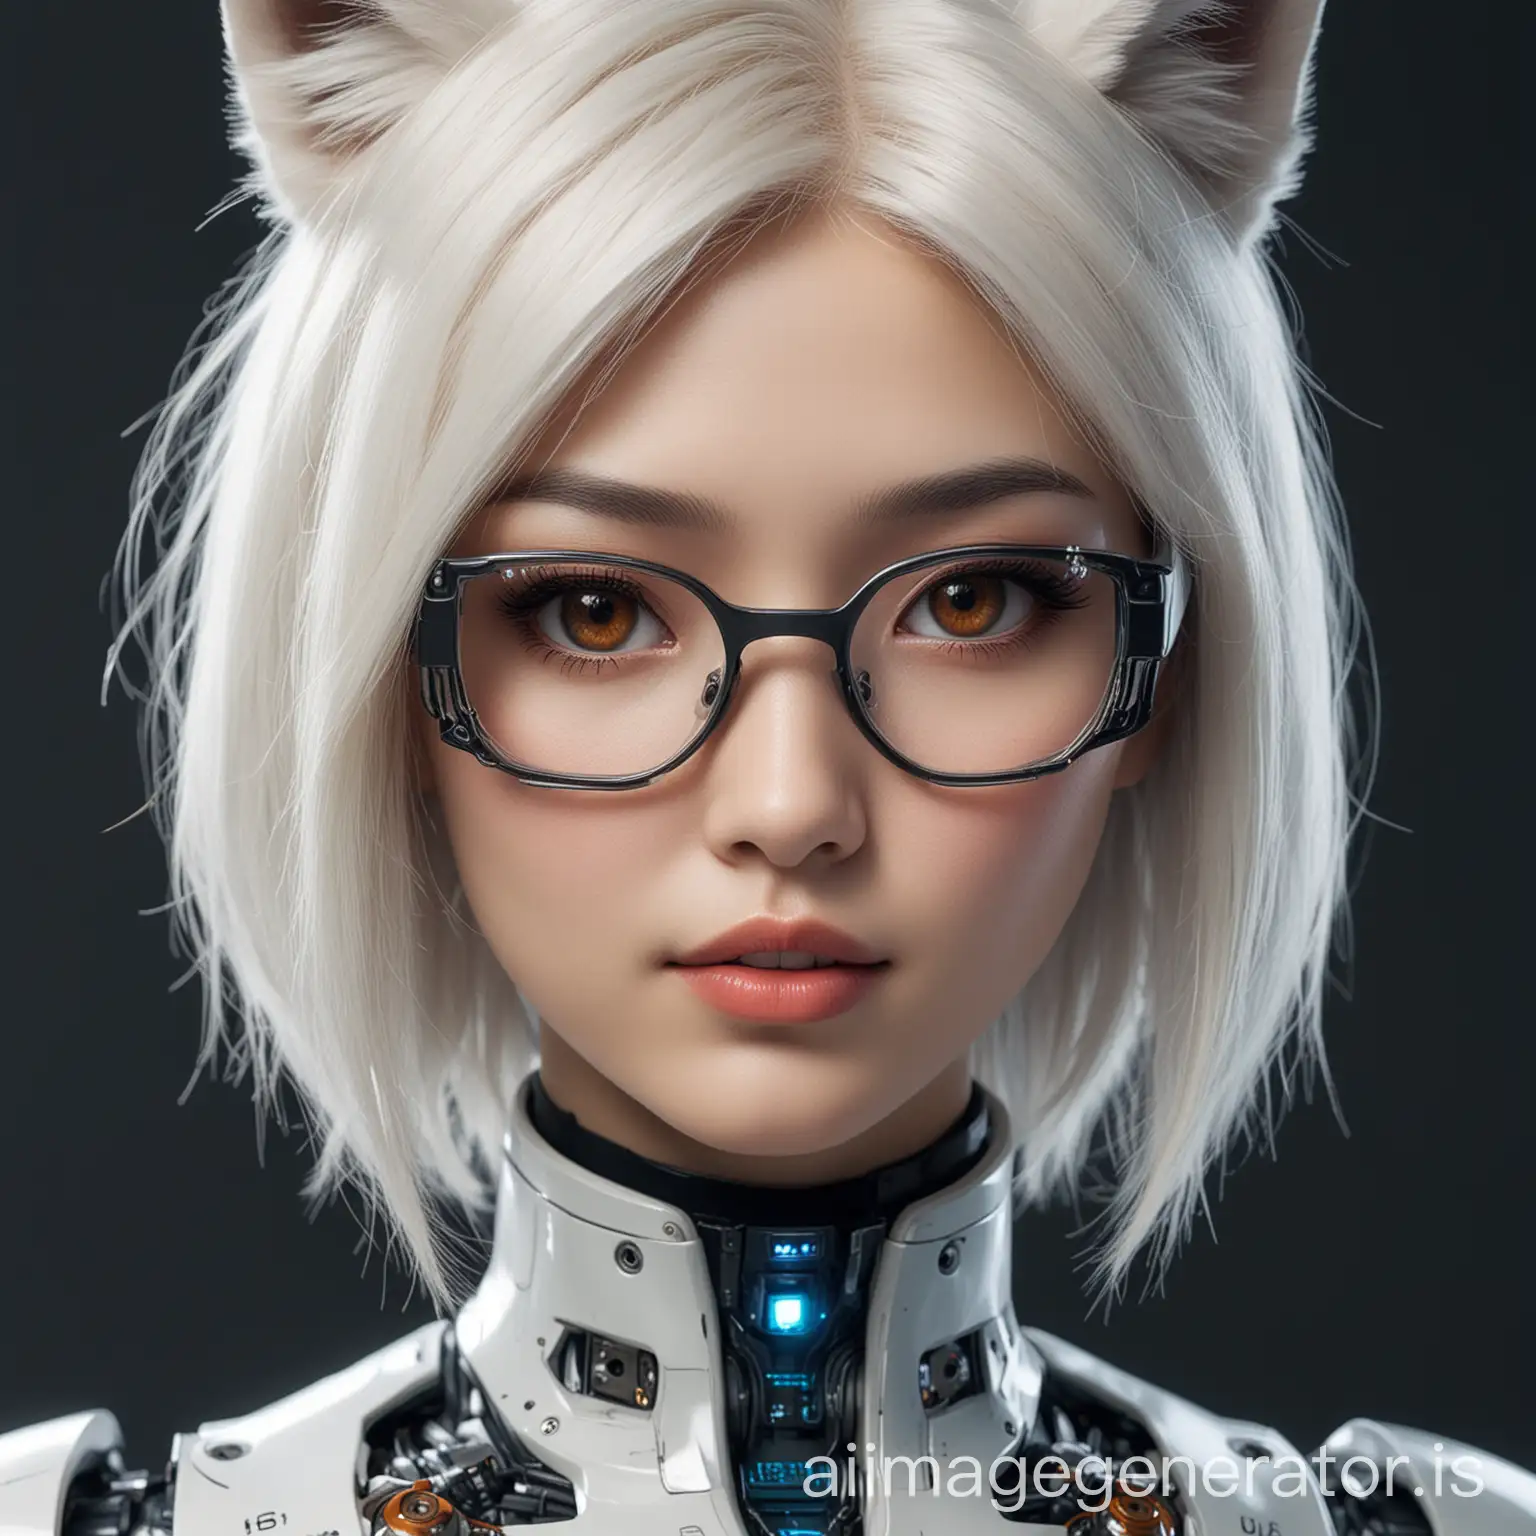 Futuristic-Asian-Robot-Girl-Online-Assistant-Logo-with-White-Hair-and-Glasses